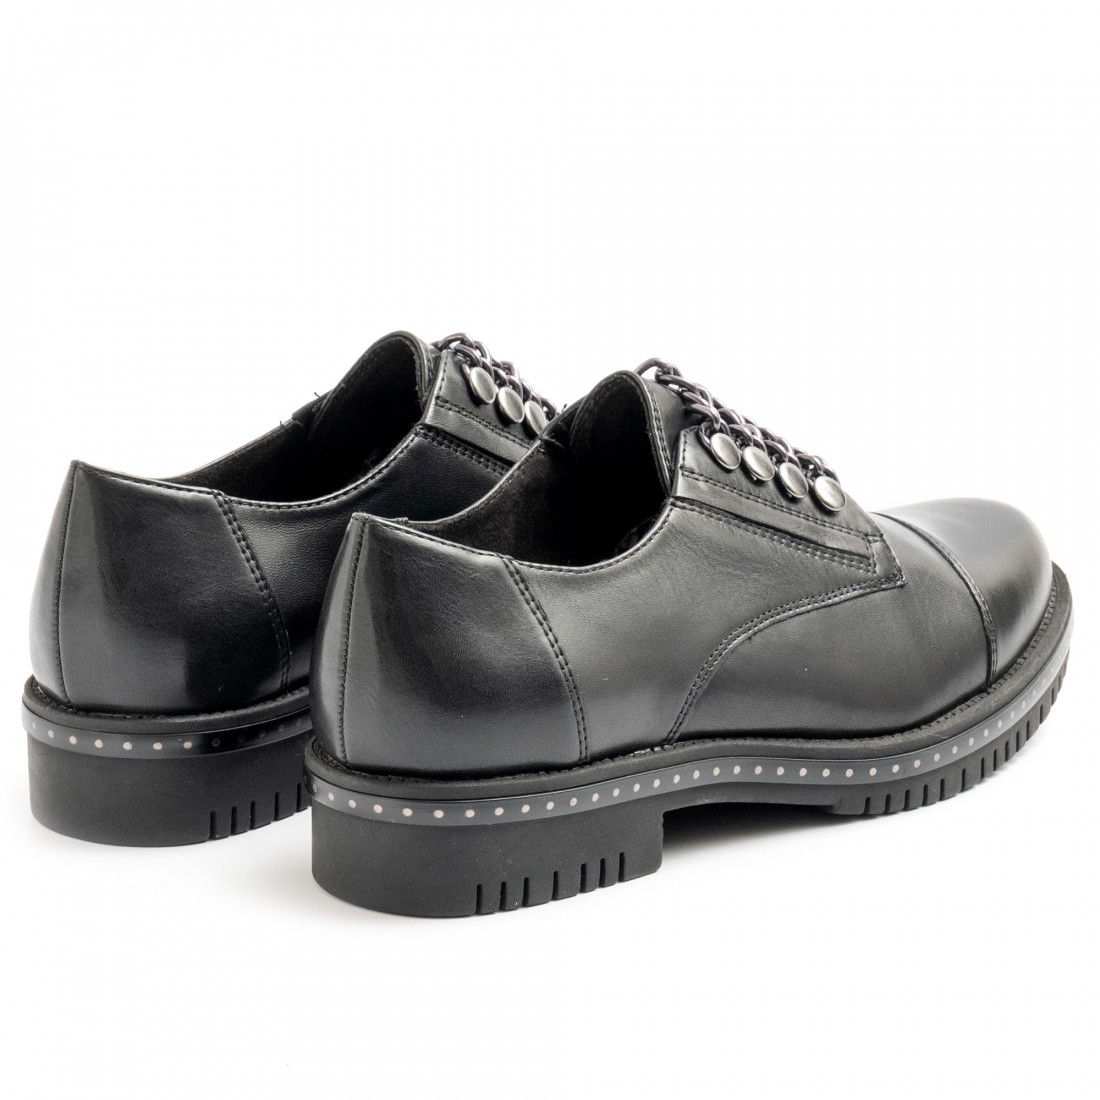 Black leather Tamaris slip on with chains and studs